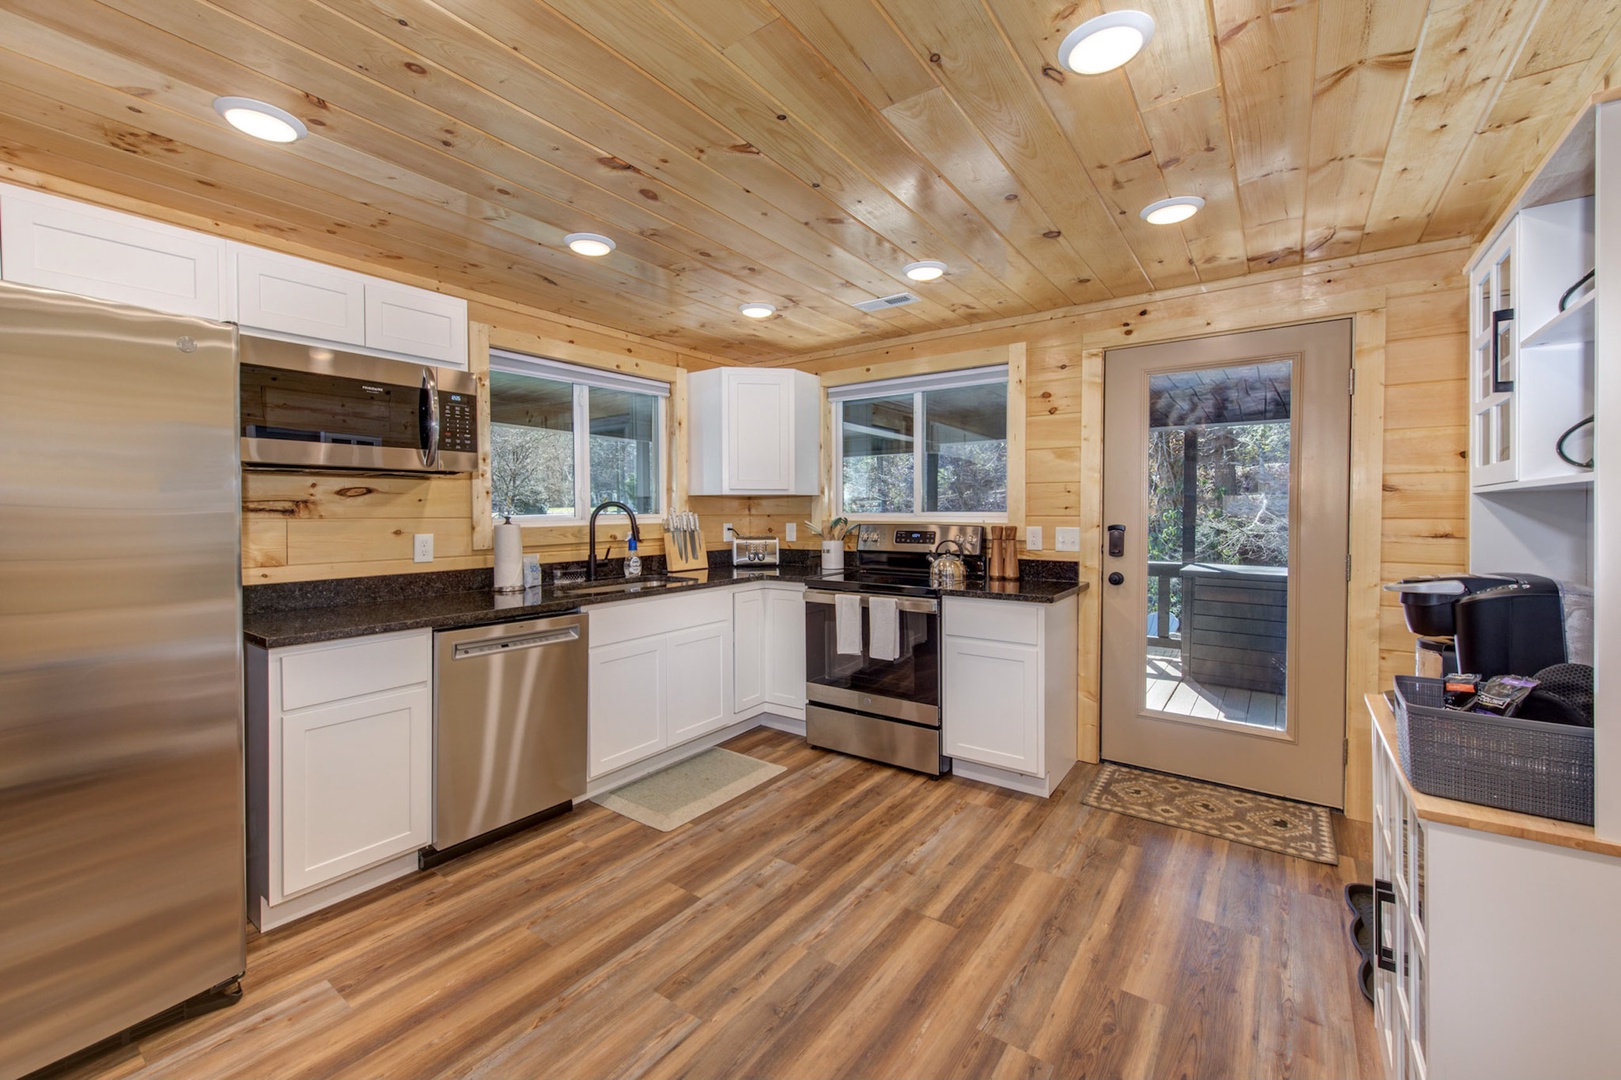 This open kitchen offers ample space & all the comforts of home